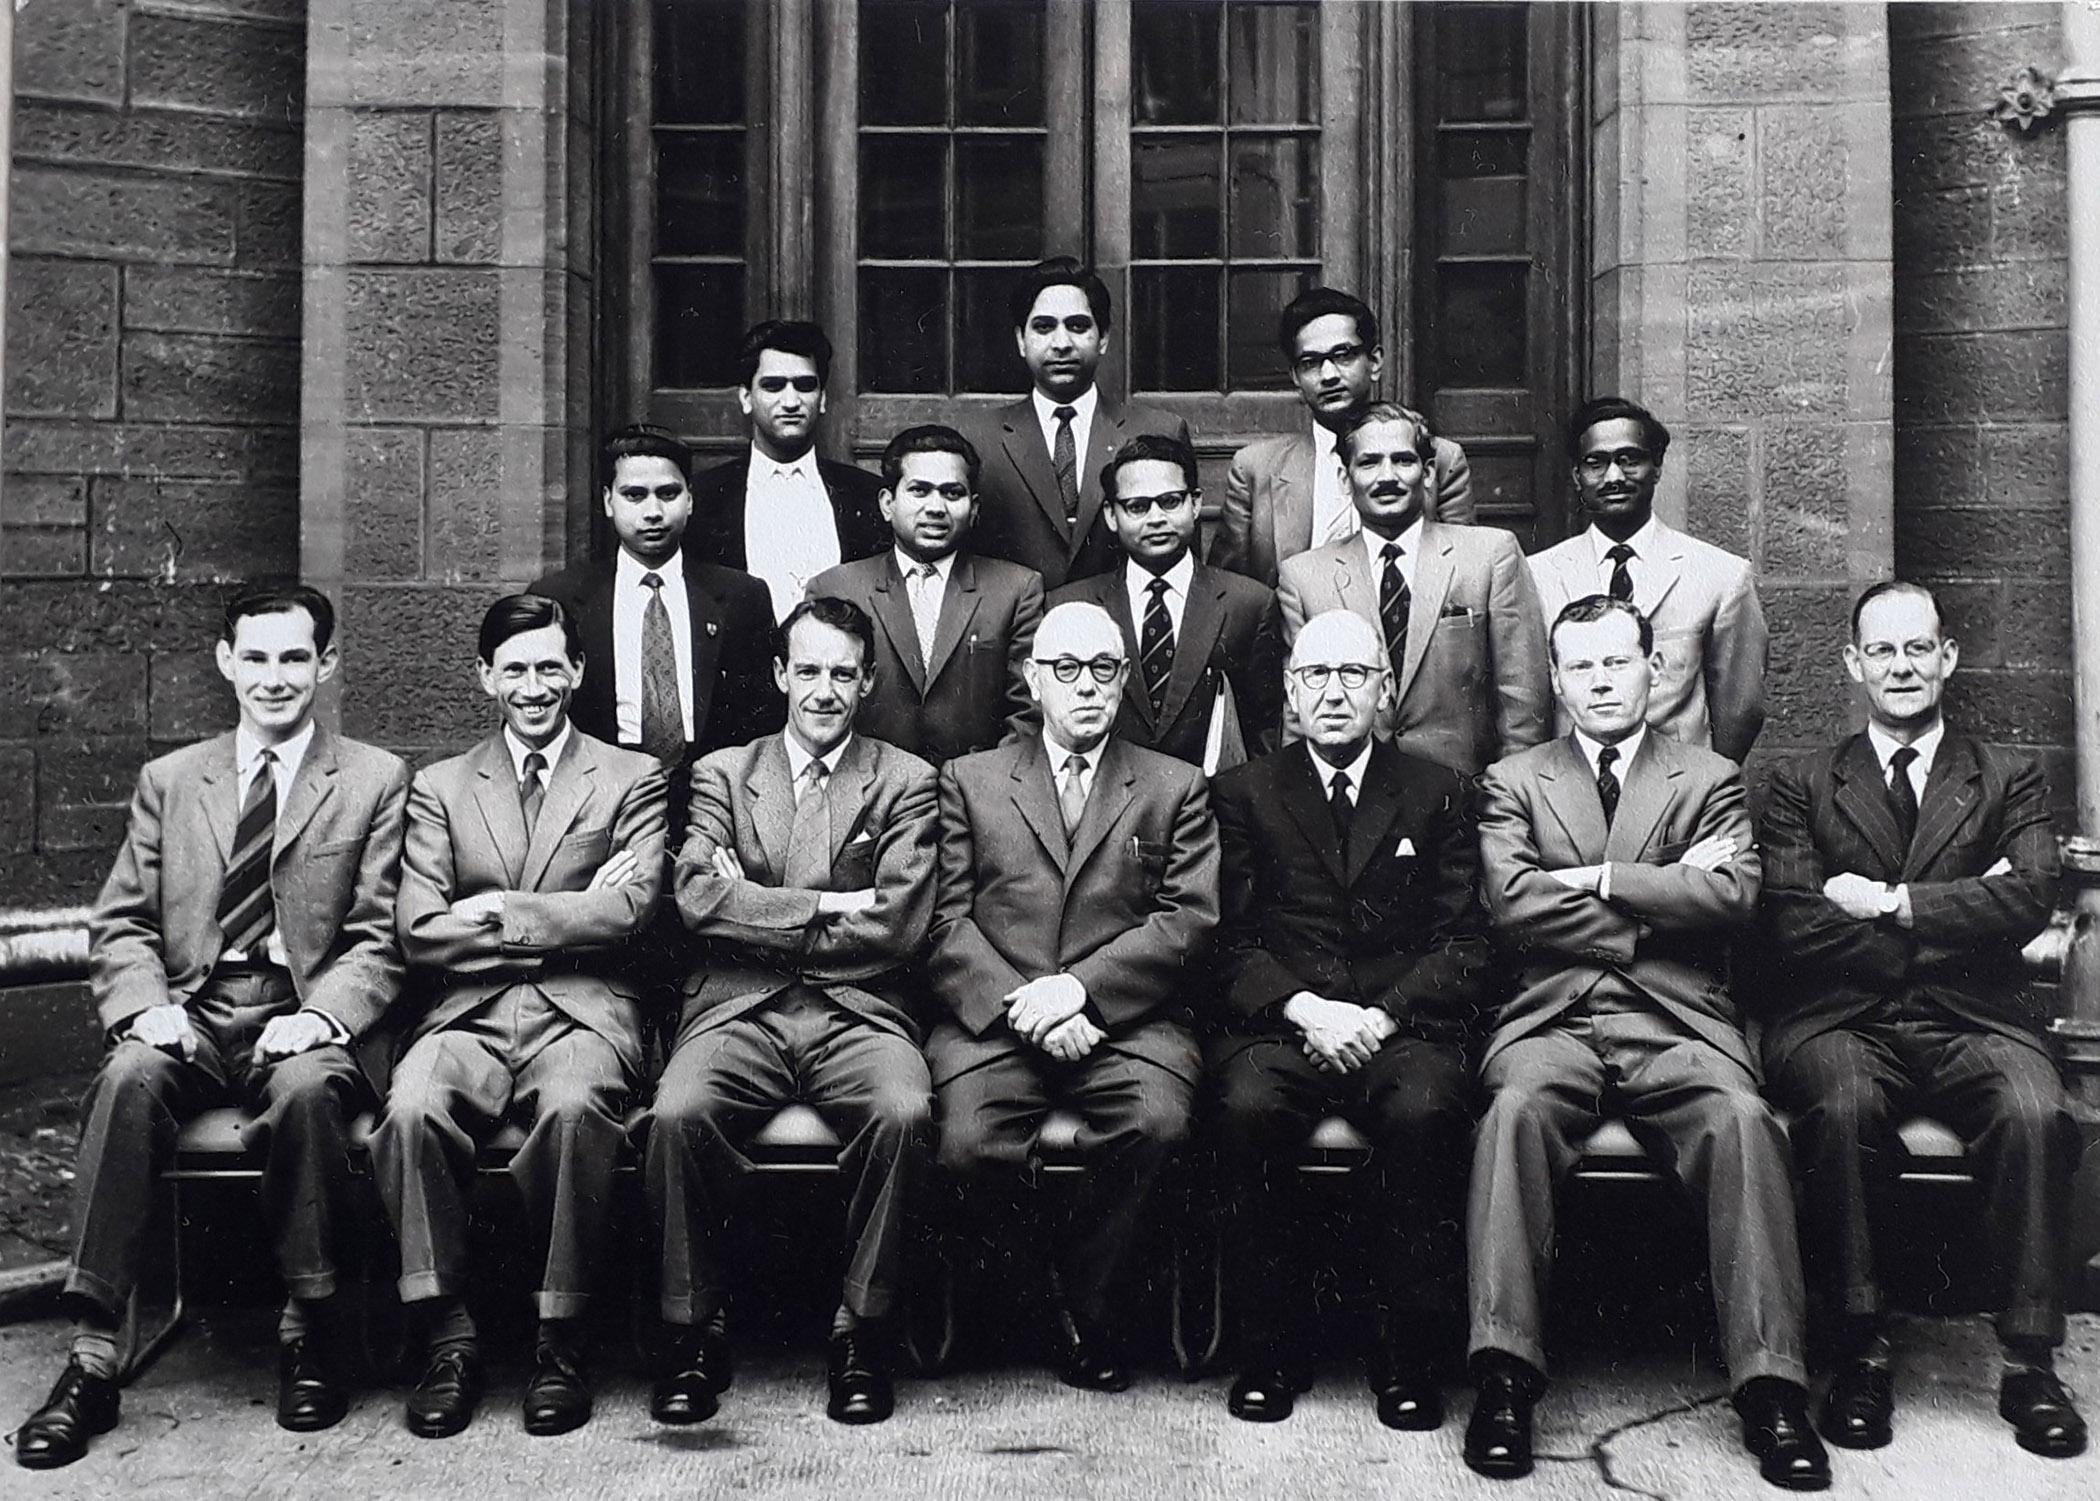 textile department staff and final year students 1960-61